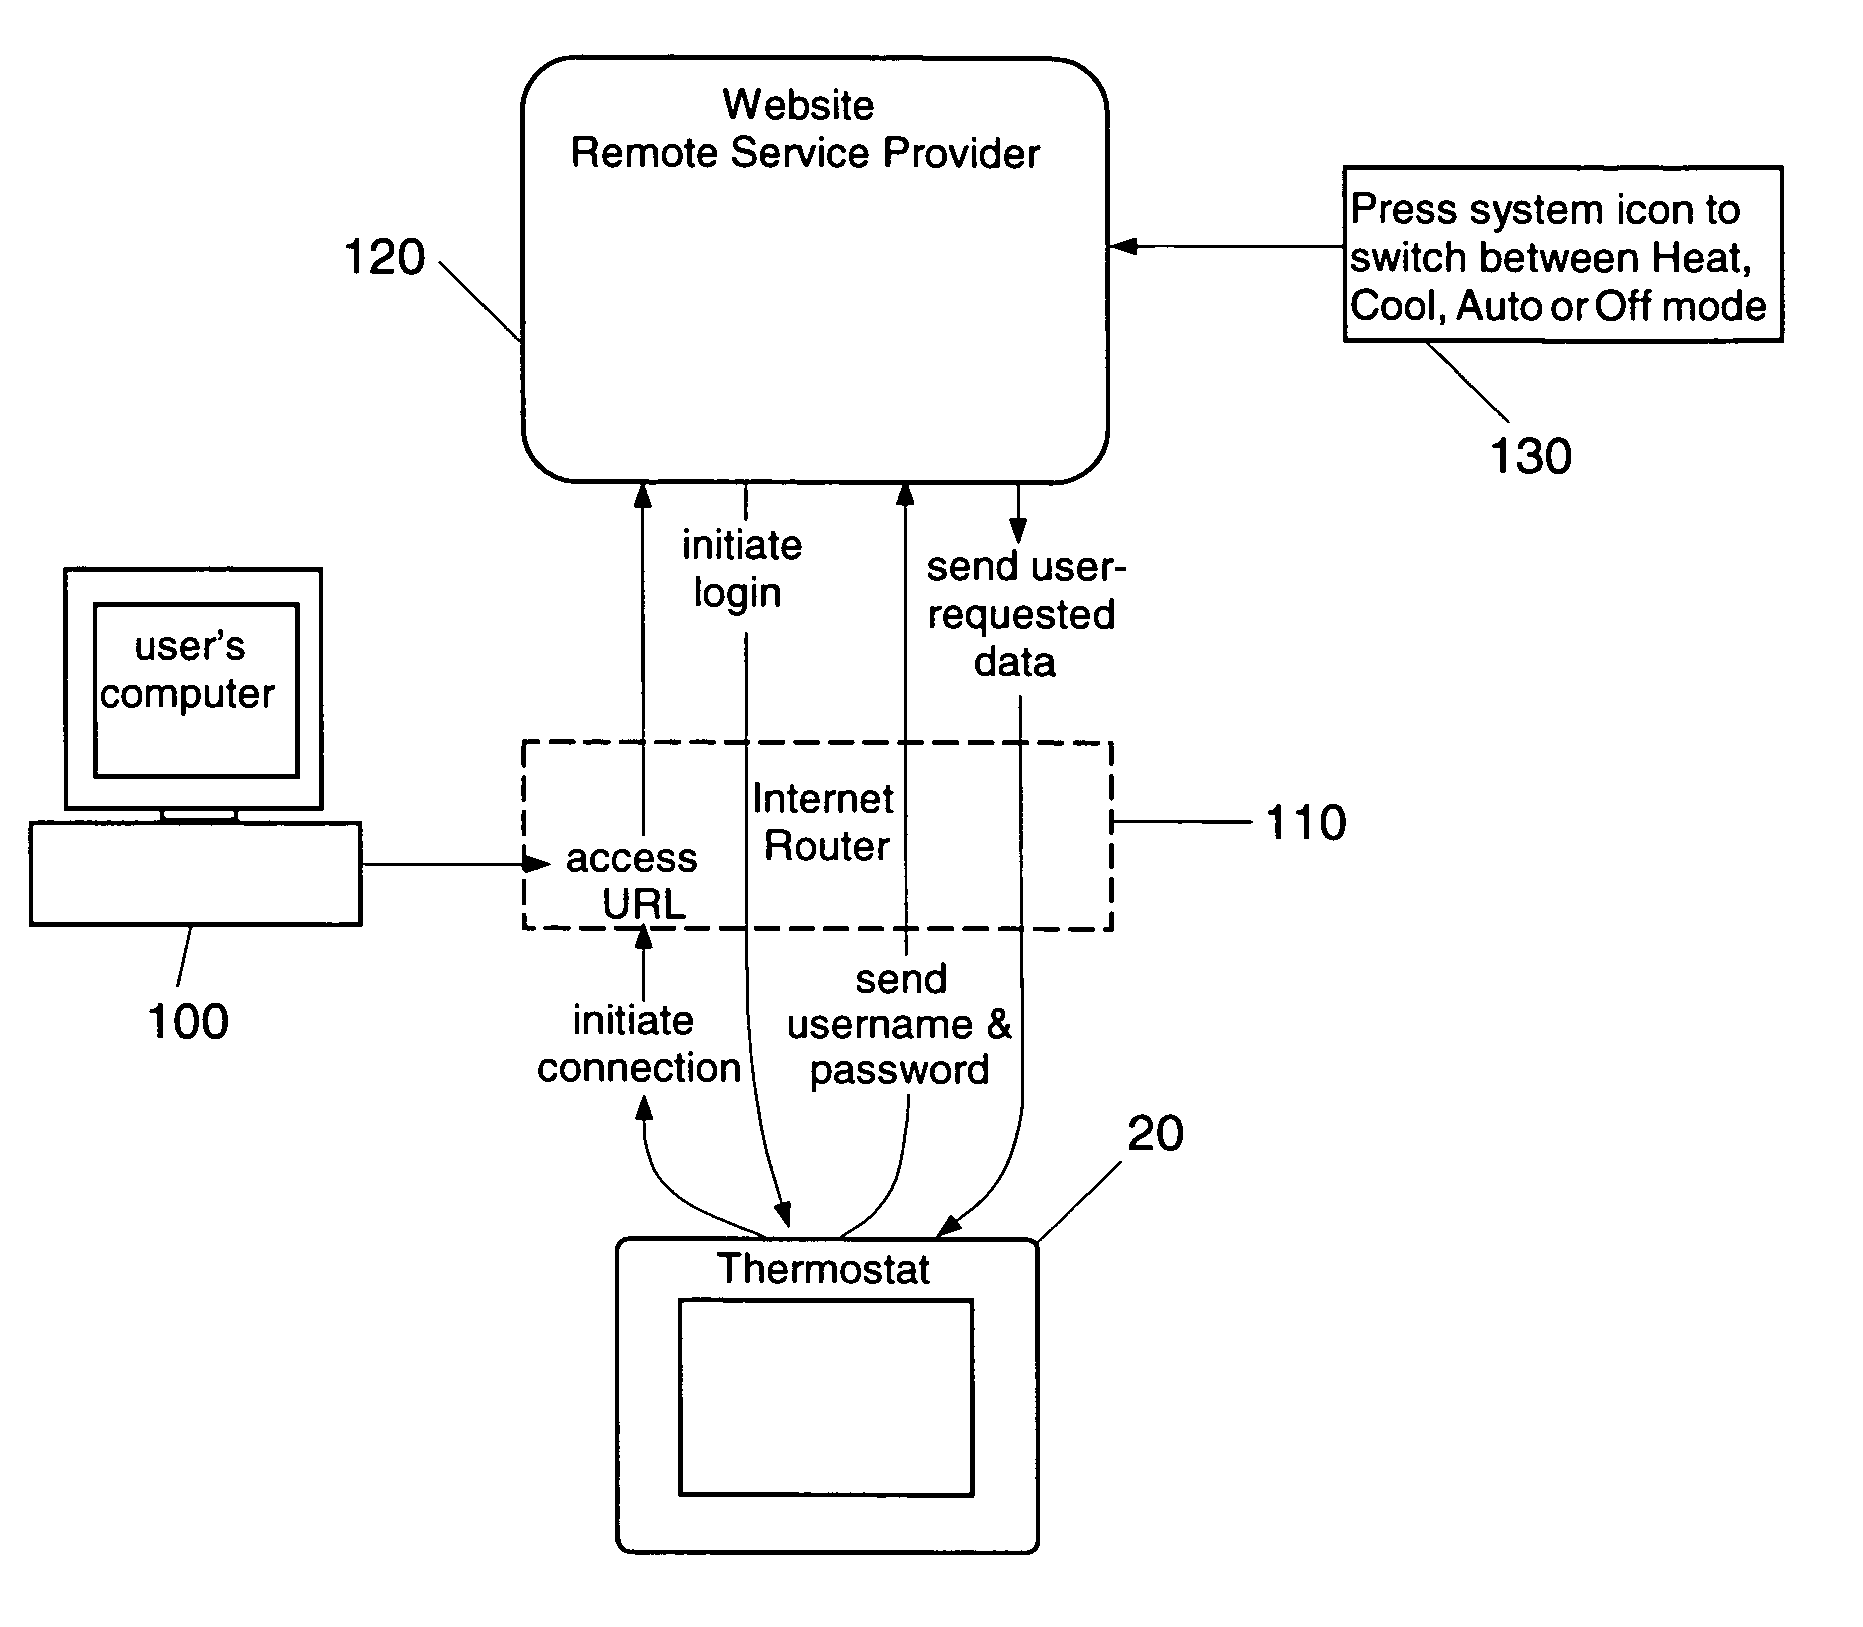 Thermostat capable of displaying recieved information